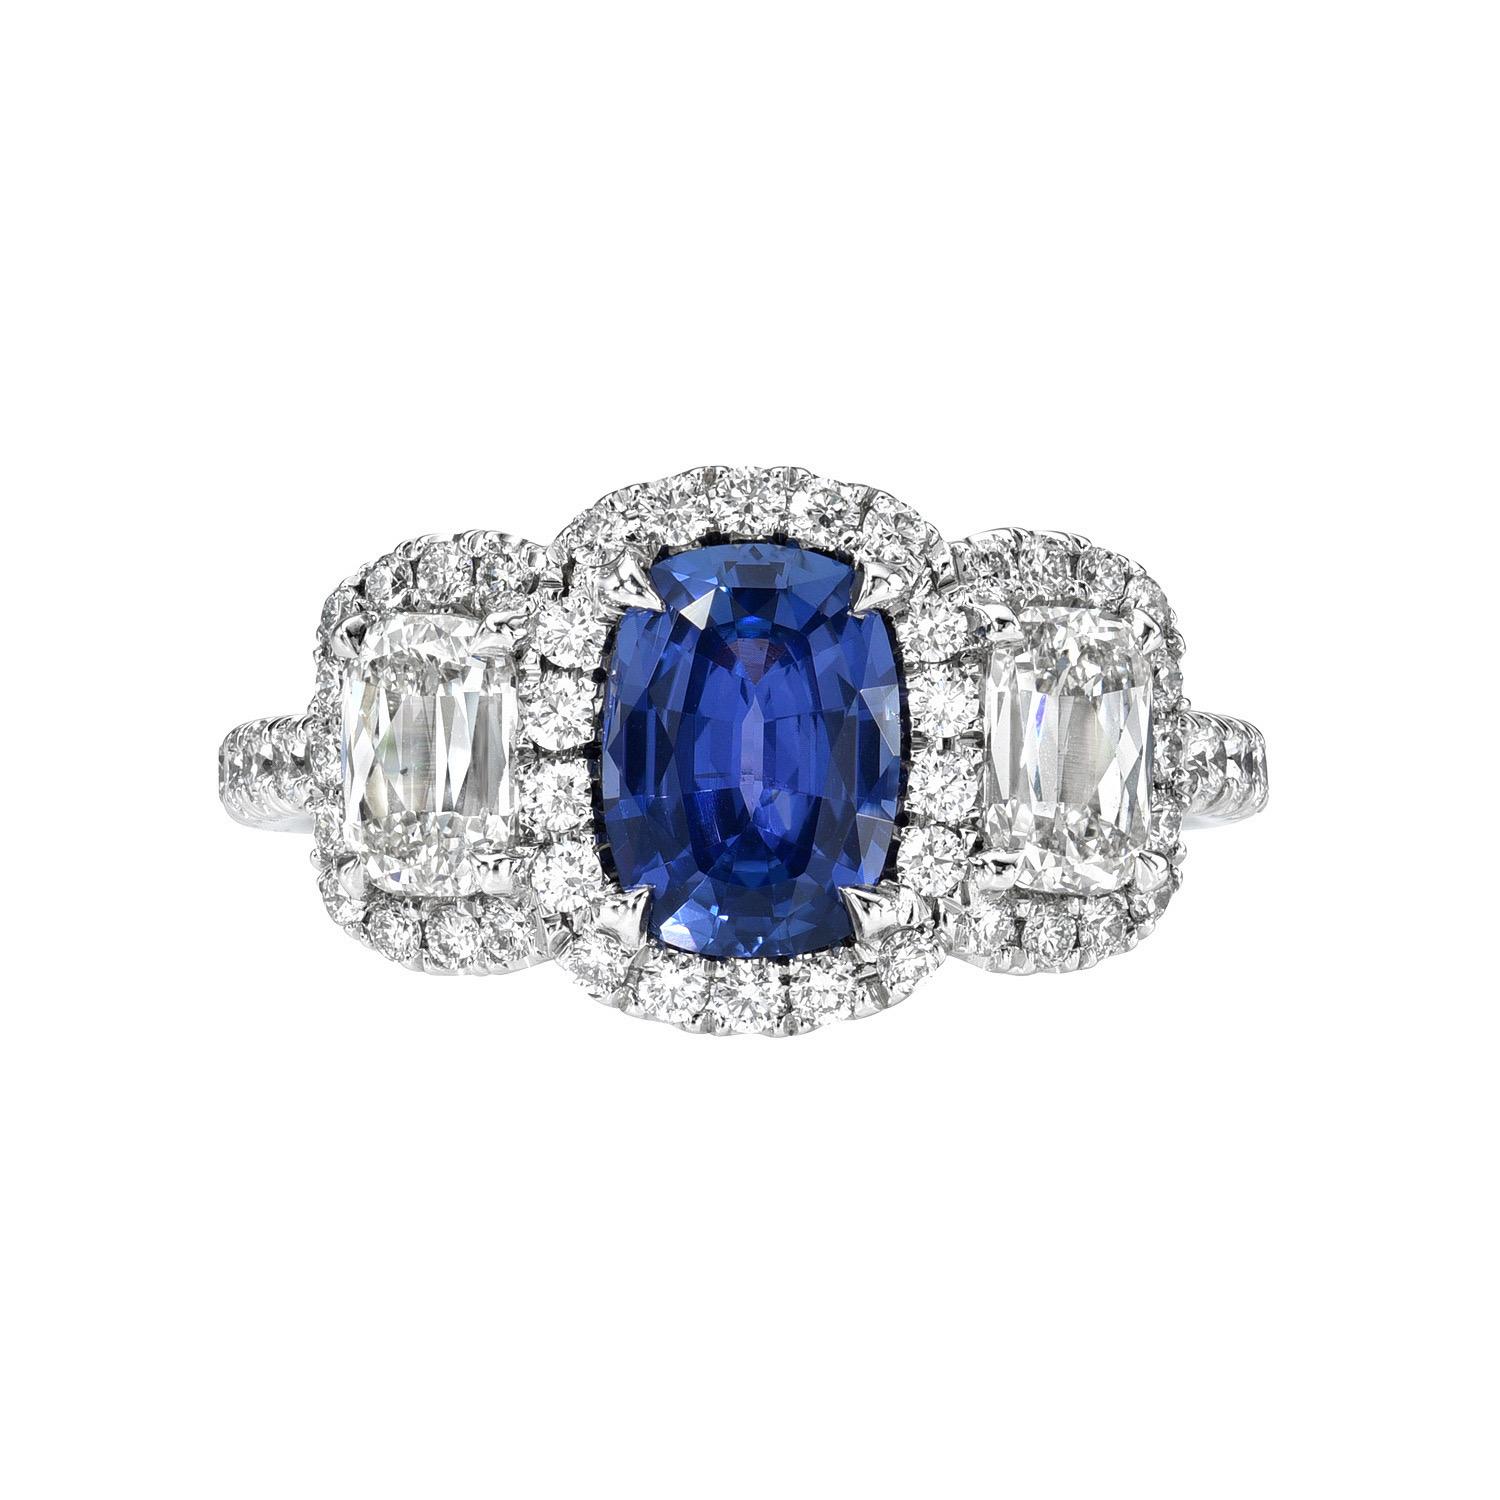 Unheated Color Change Blue Violet Sapphire Ring 1.16 Carat Cushion Burma Natural In New Condition For Sale In Beverly Hills, CA